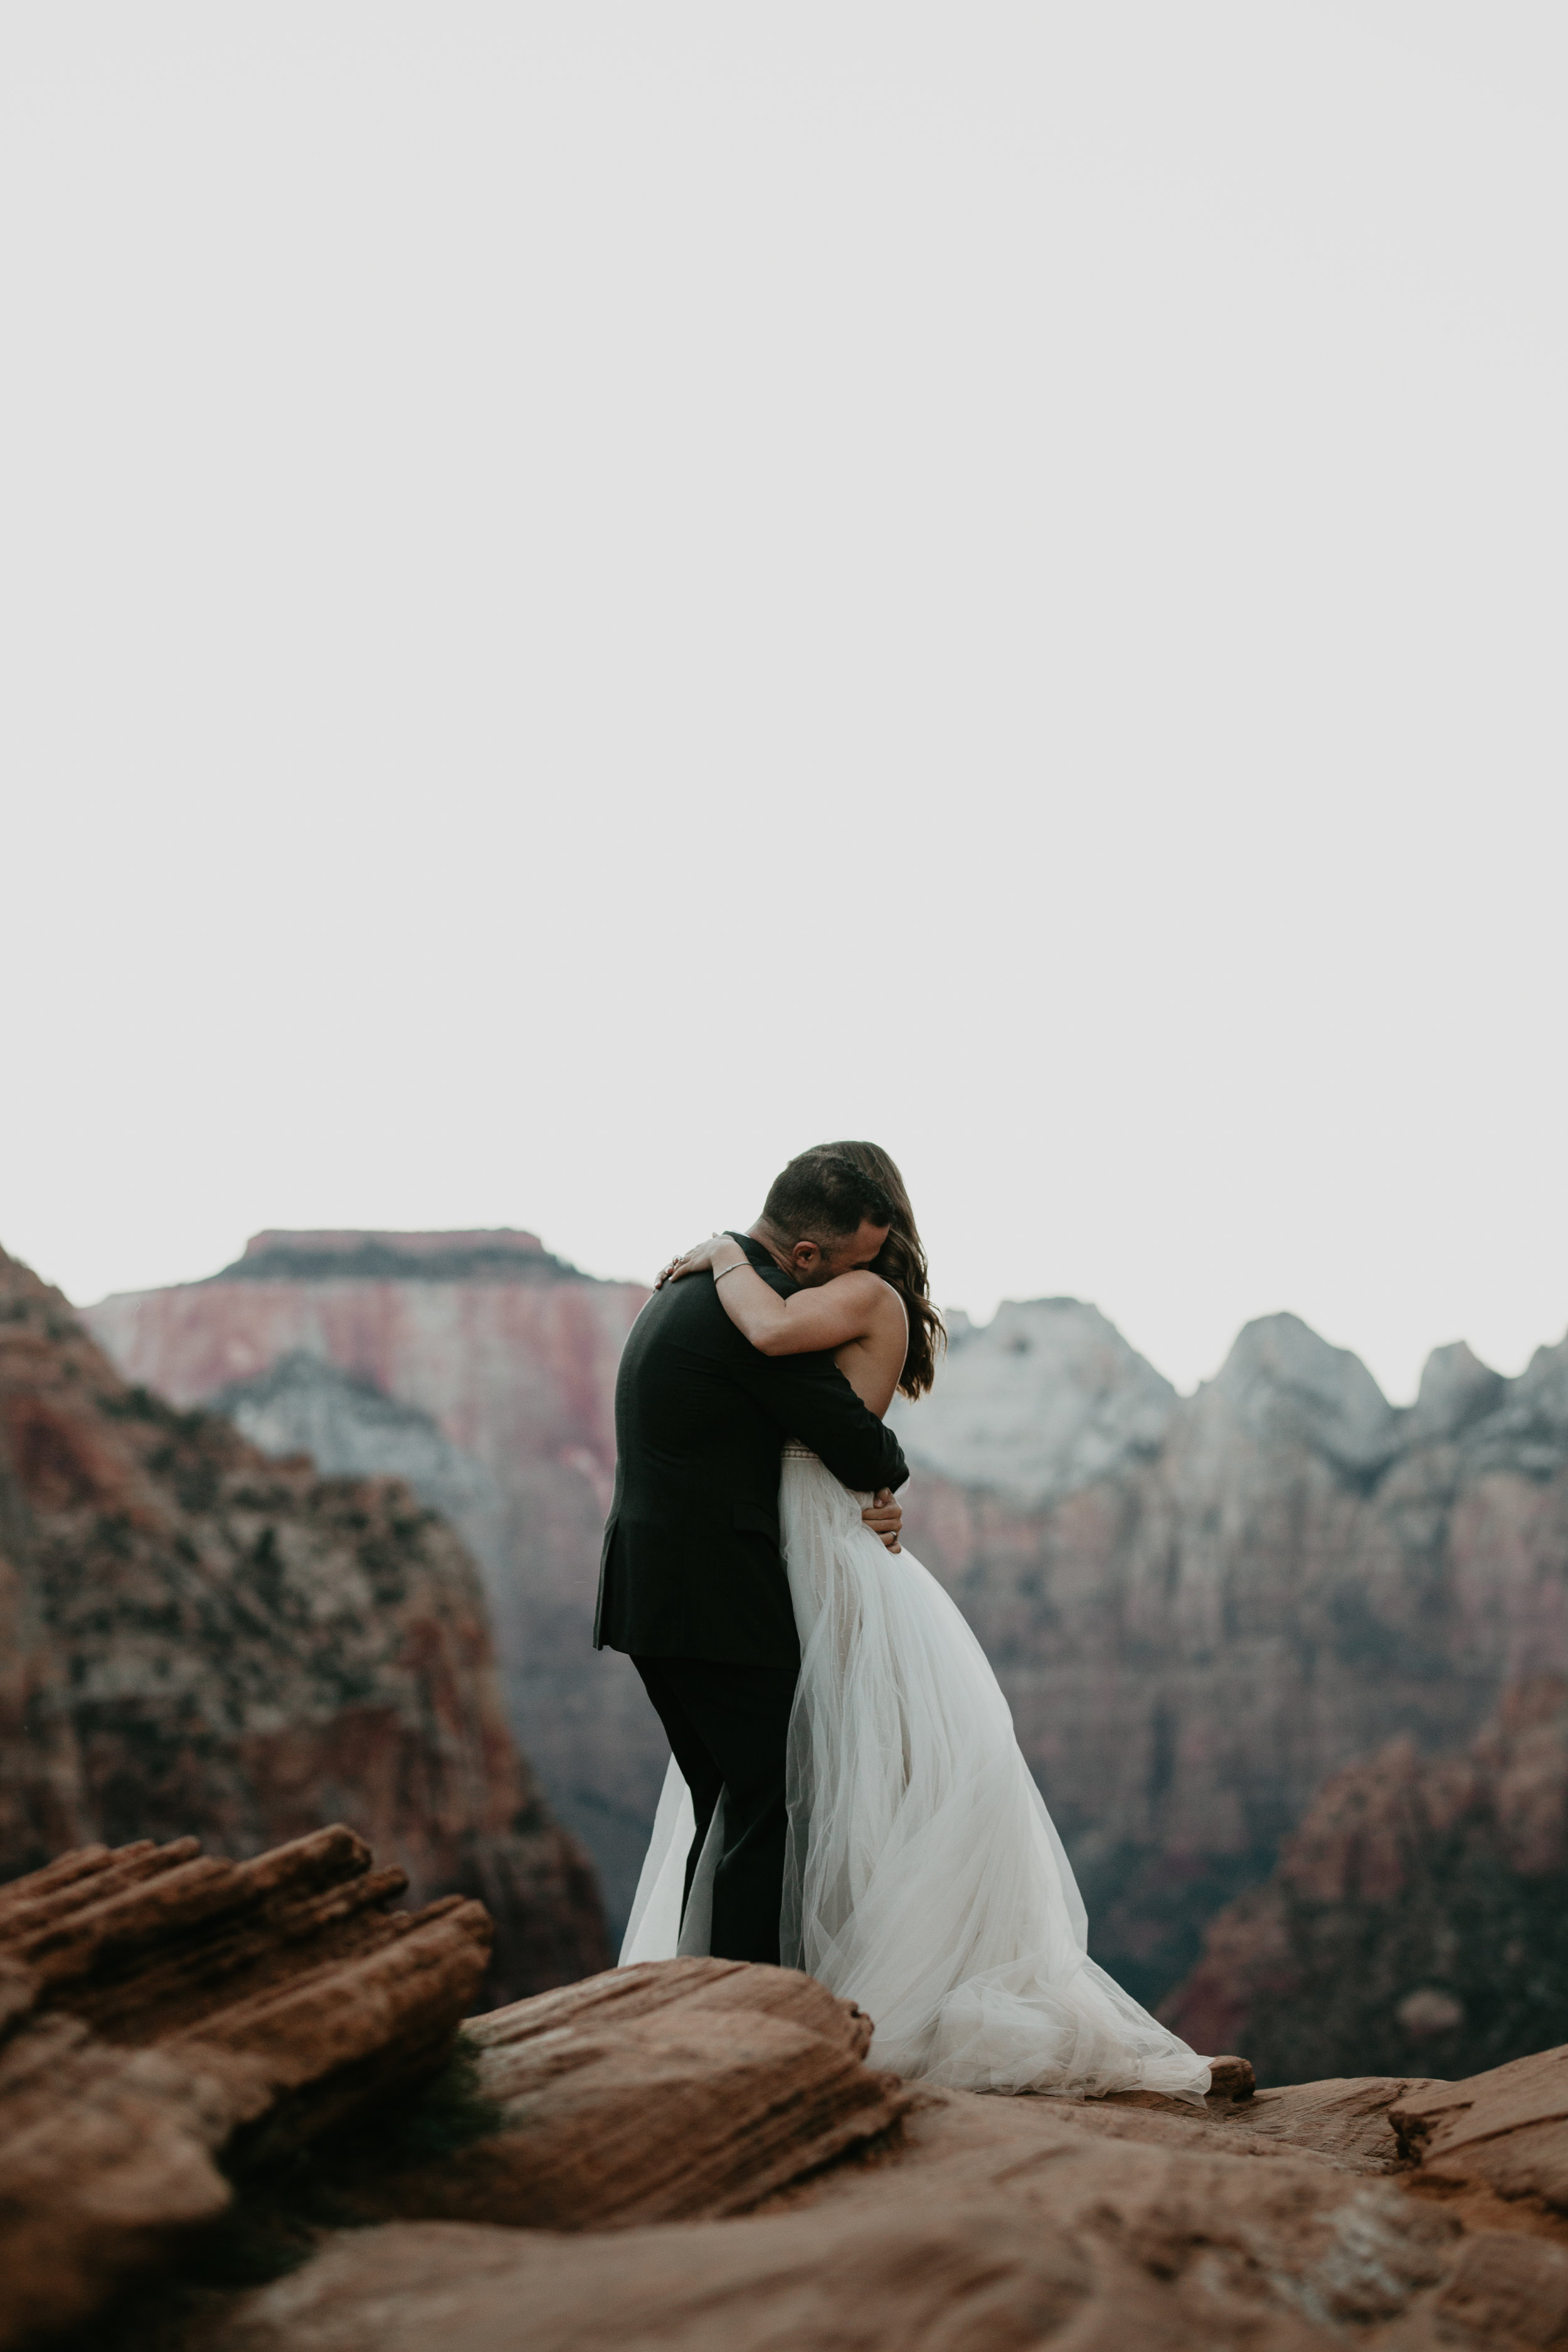 nicole-daacke-photography-zion-national-park-elopement-photographer-canyon-overlook-trail-elope-hiking-adventure-wedding-photos-fall-utah-red-rock-canyon-stgeorge-eloping-photographer-80.jpg